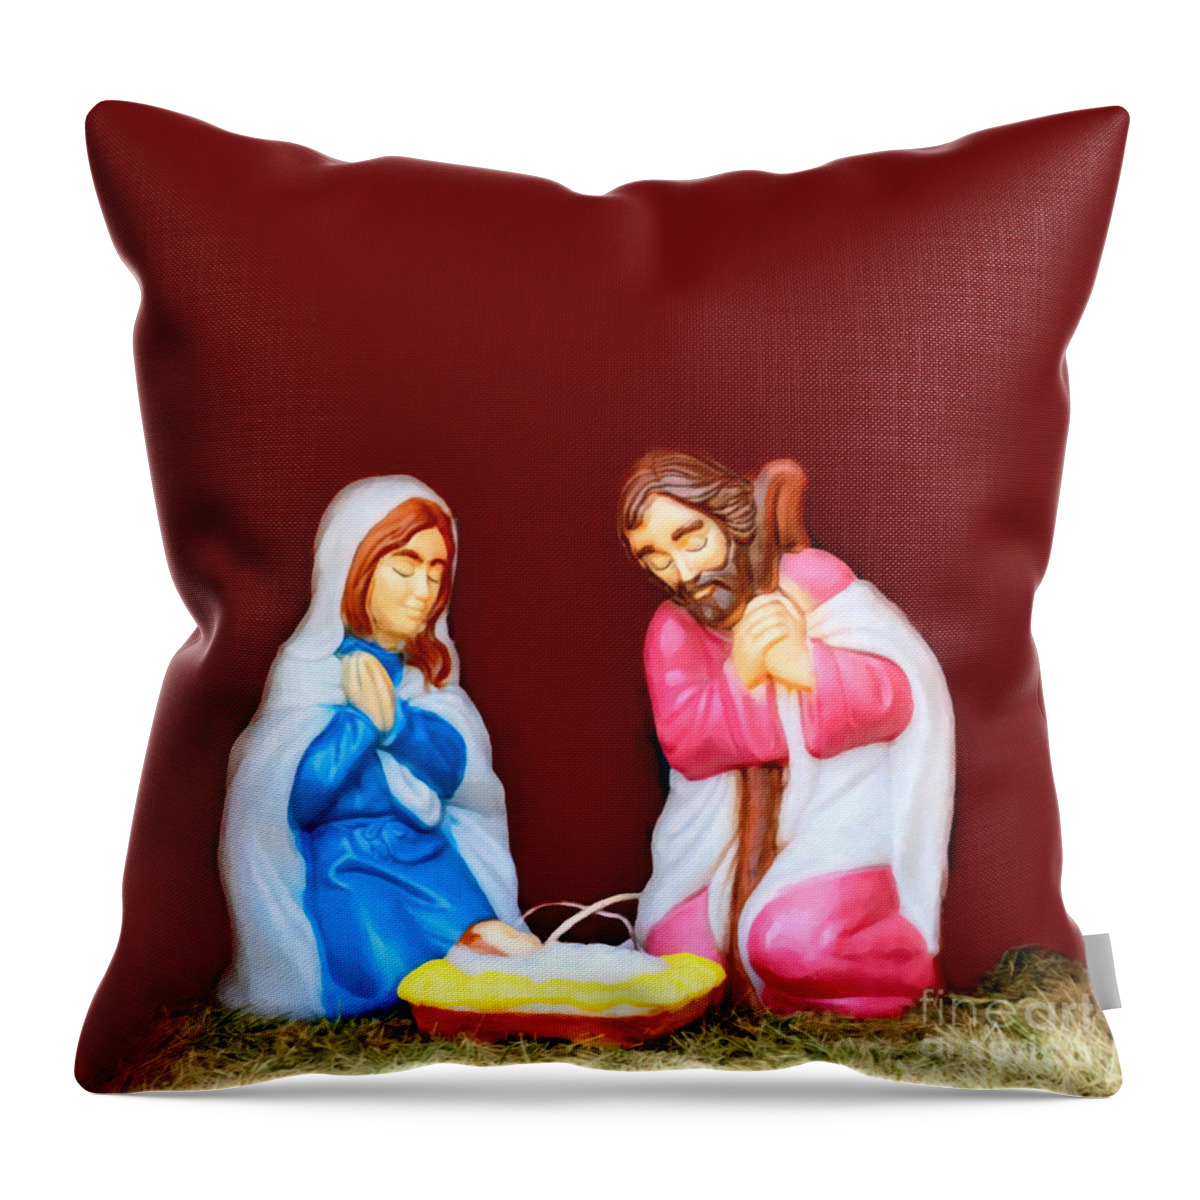 Adoration Of Holy Family Throw Pillow featuring the photograph Adoration of The Holy Family by Munir Alawi